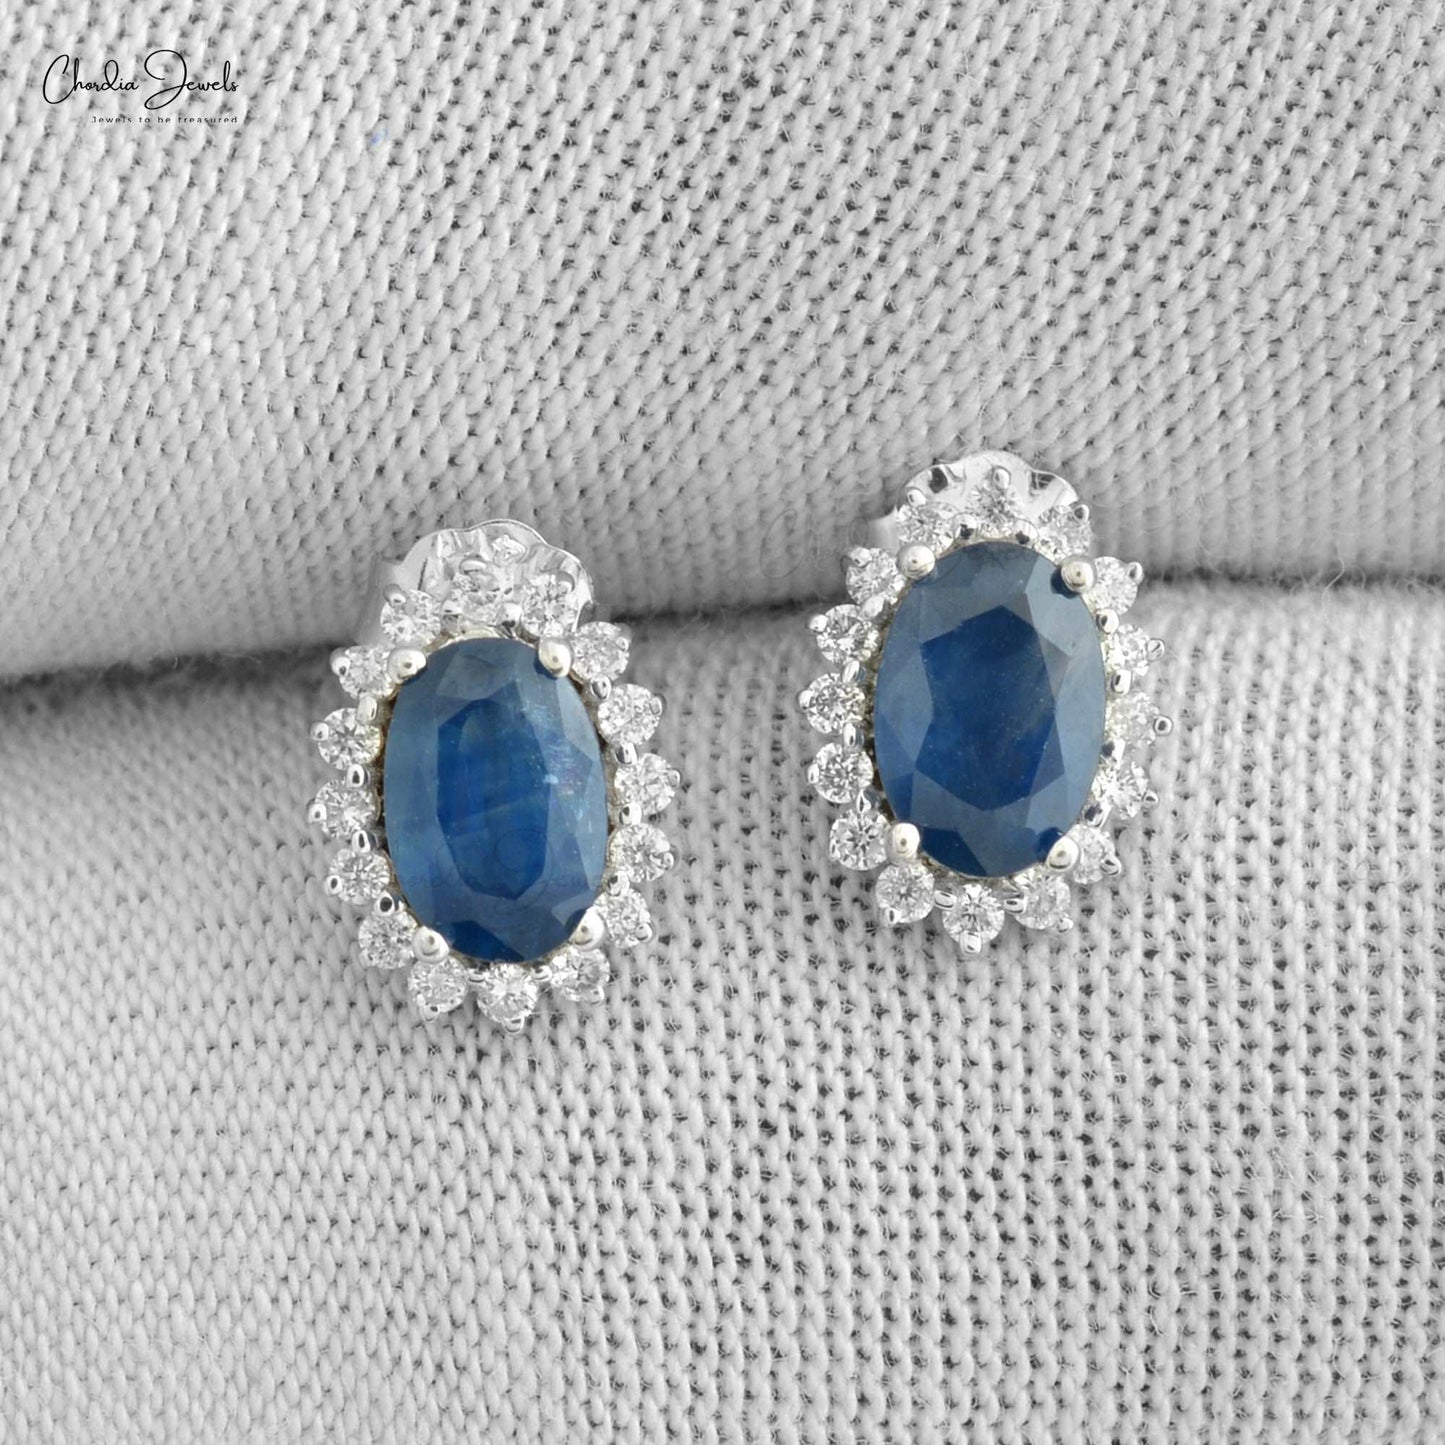 1.16 Carat Oval Cut Natural  Blue Sapphire Earrings For Anniversary, 14k Solid White Gold Diamond and Gemstone Halo Earrings For Birthday Gift